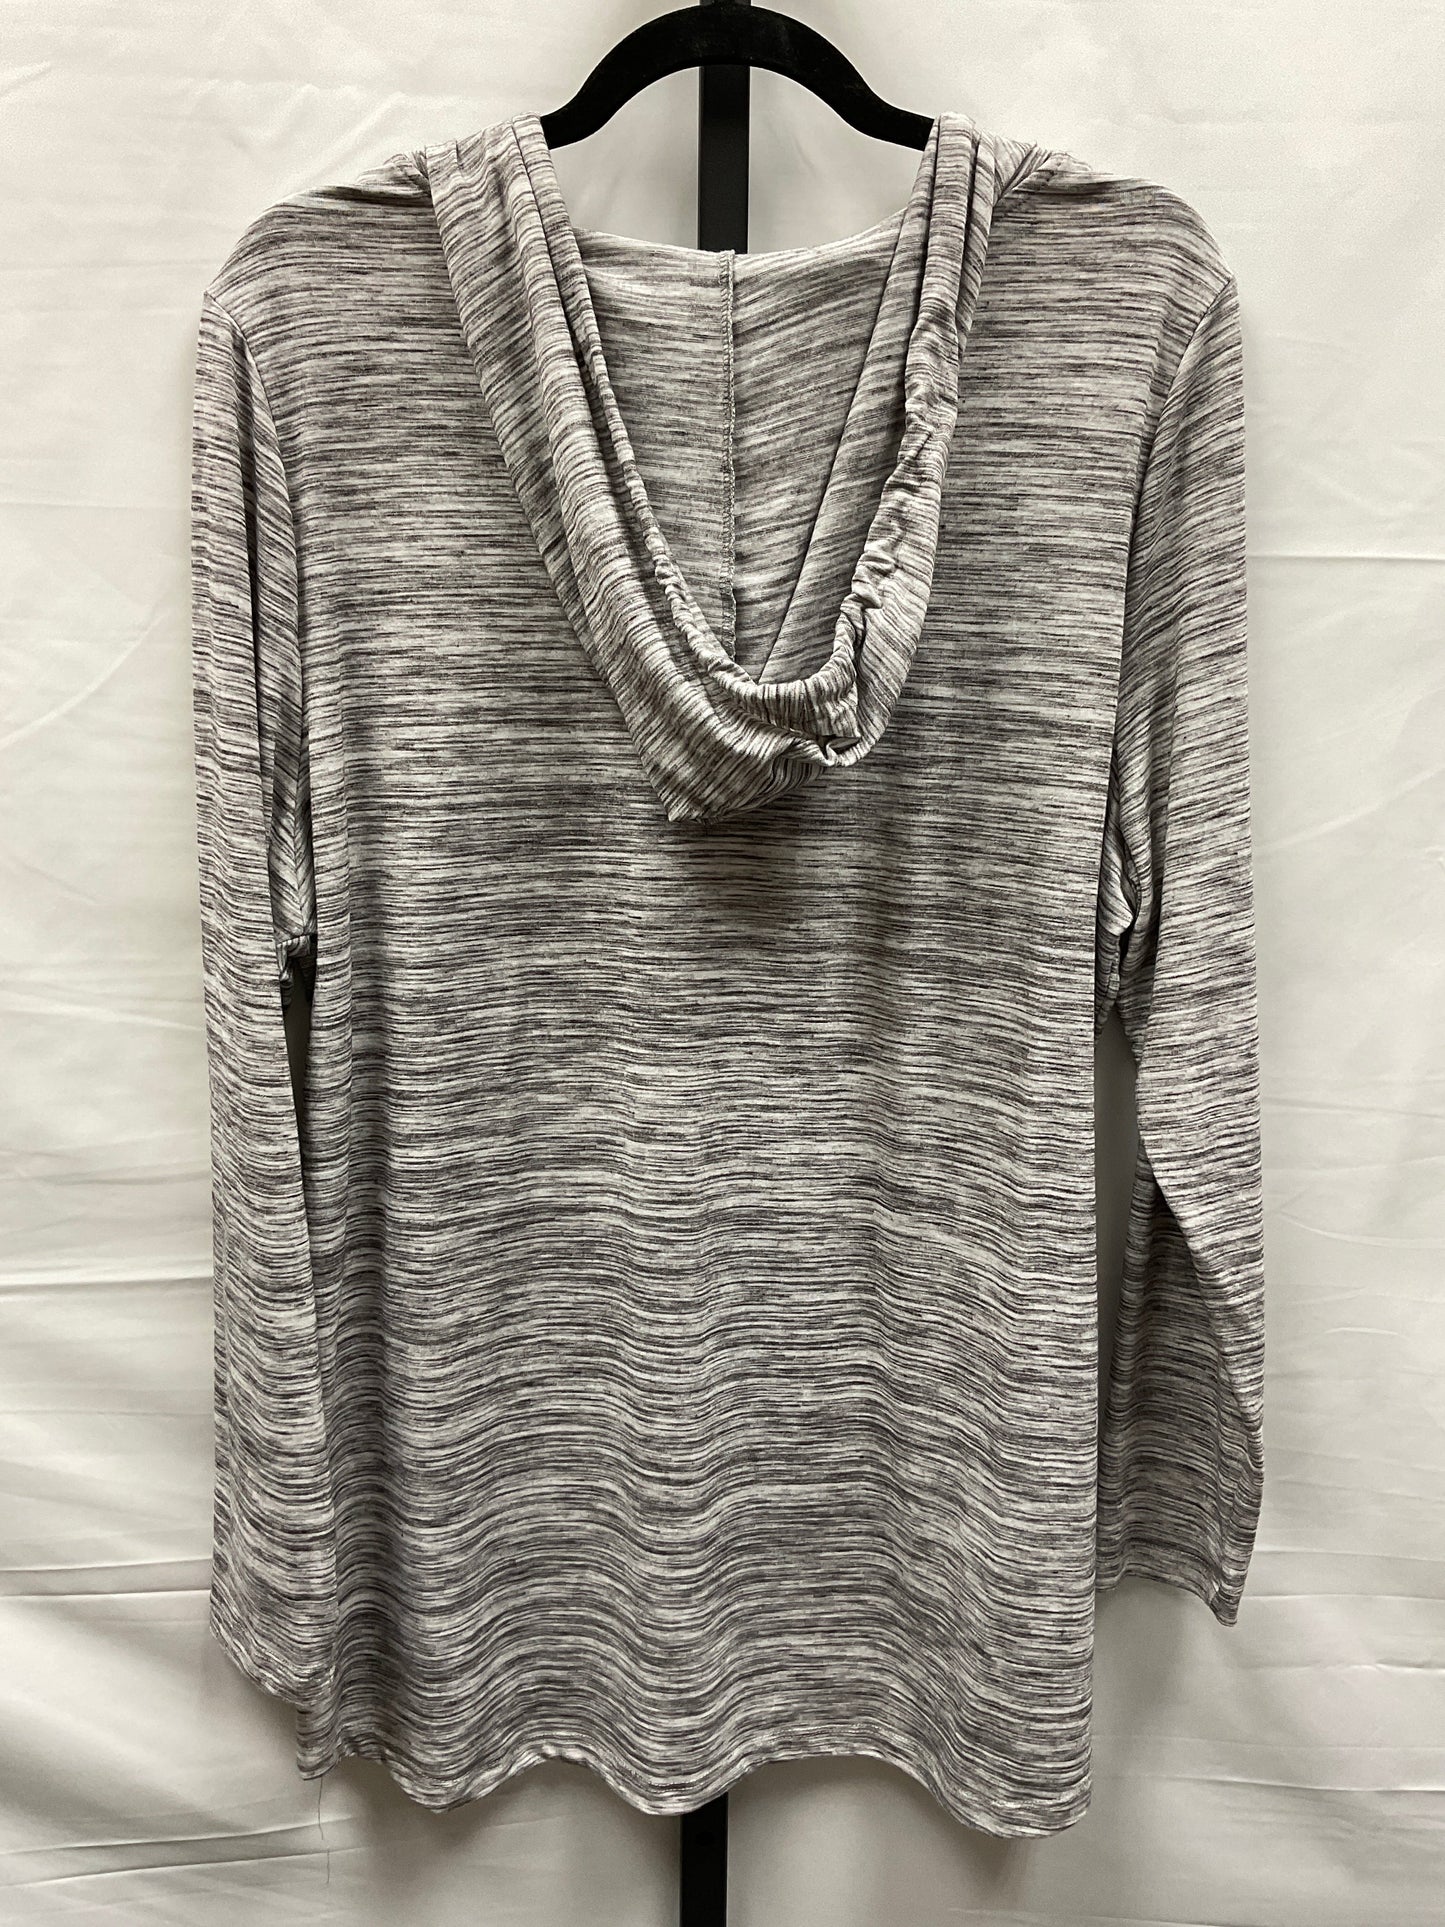 Grey & White Top Long Sleeve Balance Collection, Size 1x